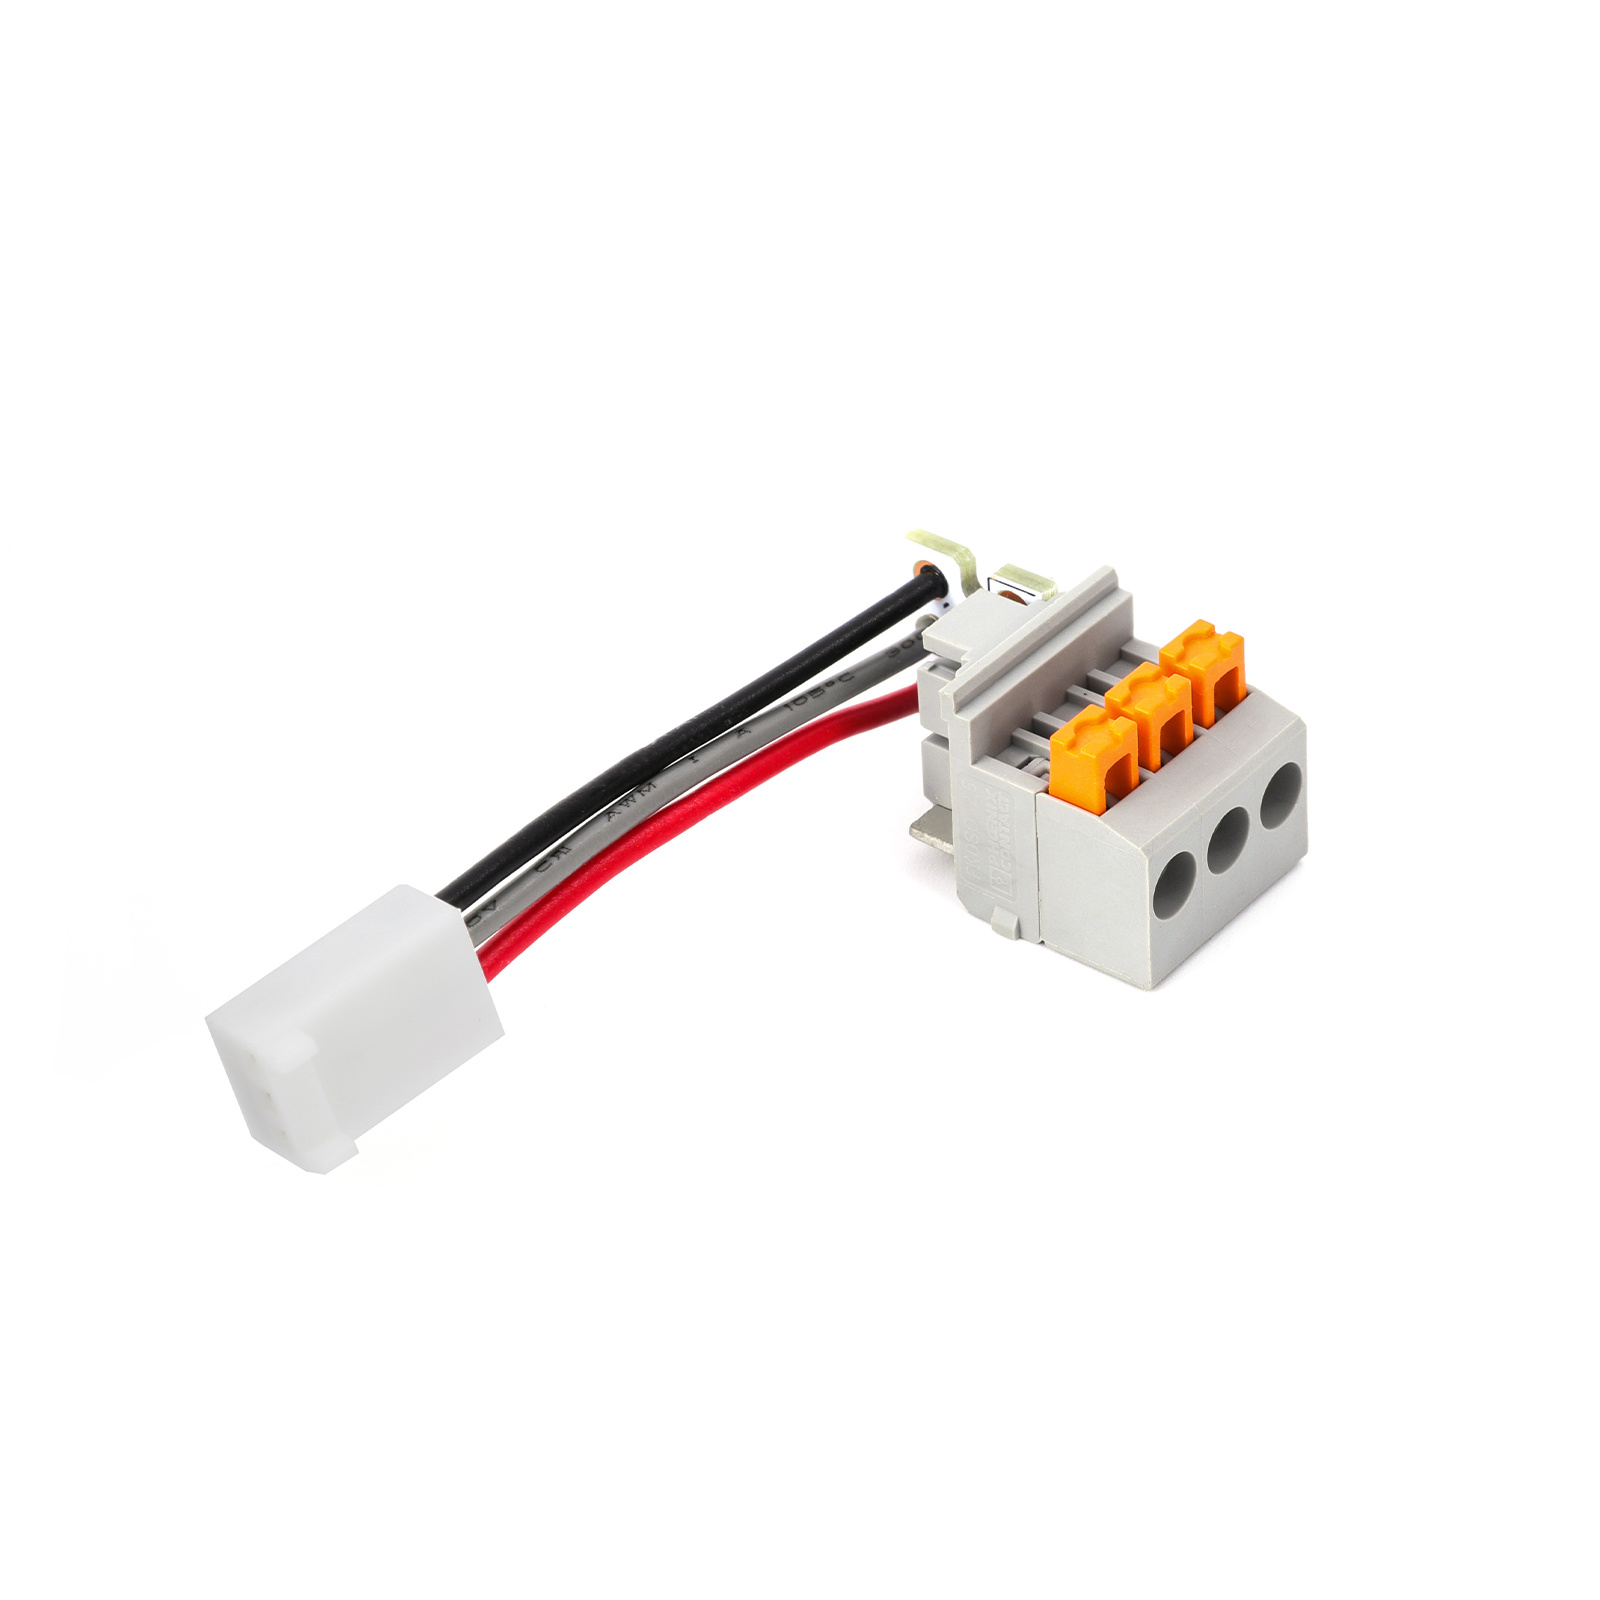 Custom AC DC Power Supply Pluggable Terminal Block Wire Harness for numerous applications